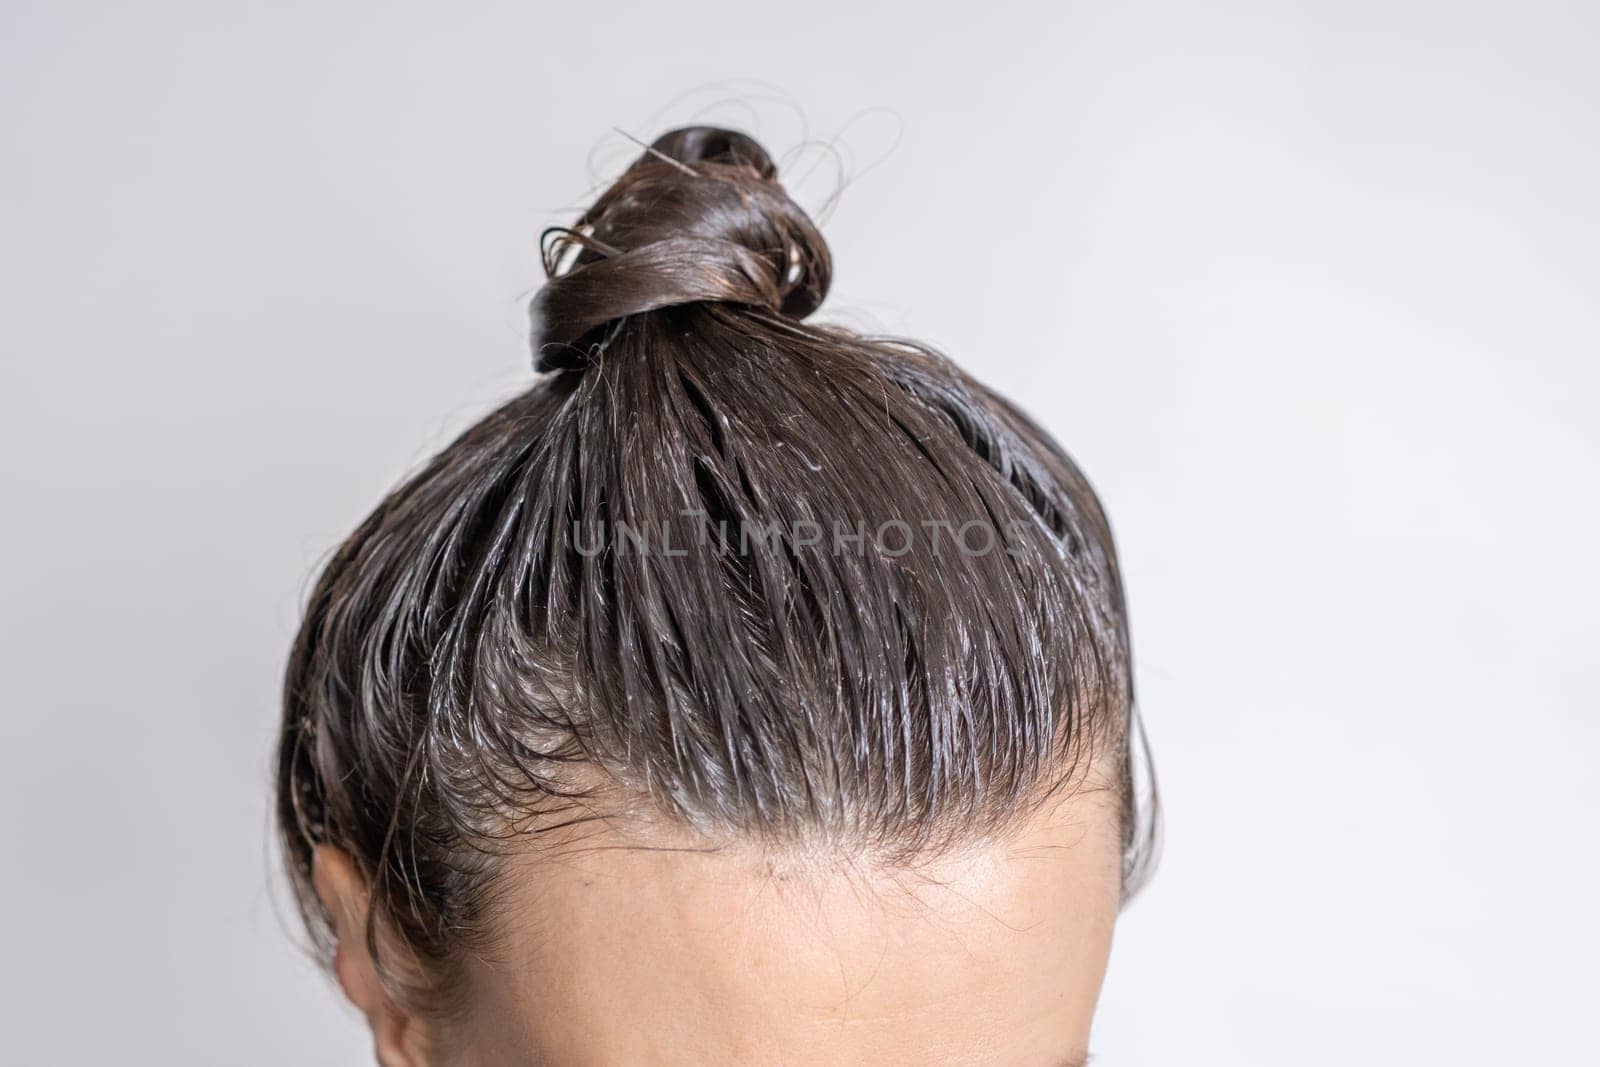 Close-up of a woman's heClose-up of a woman's head in the process of hair coloring on a white background. Closeup woman hands dyeing hair using a brush. Colouring of white hair at home.